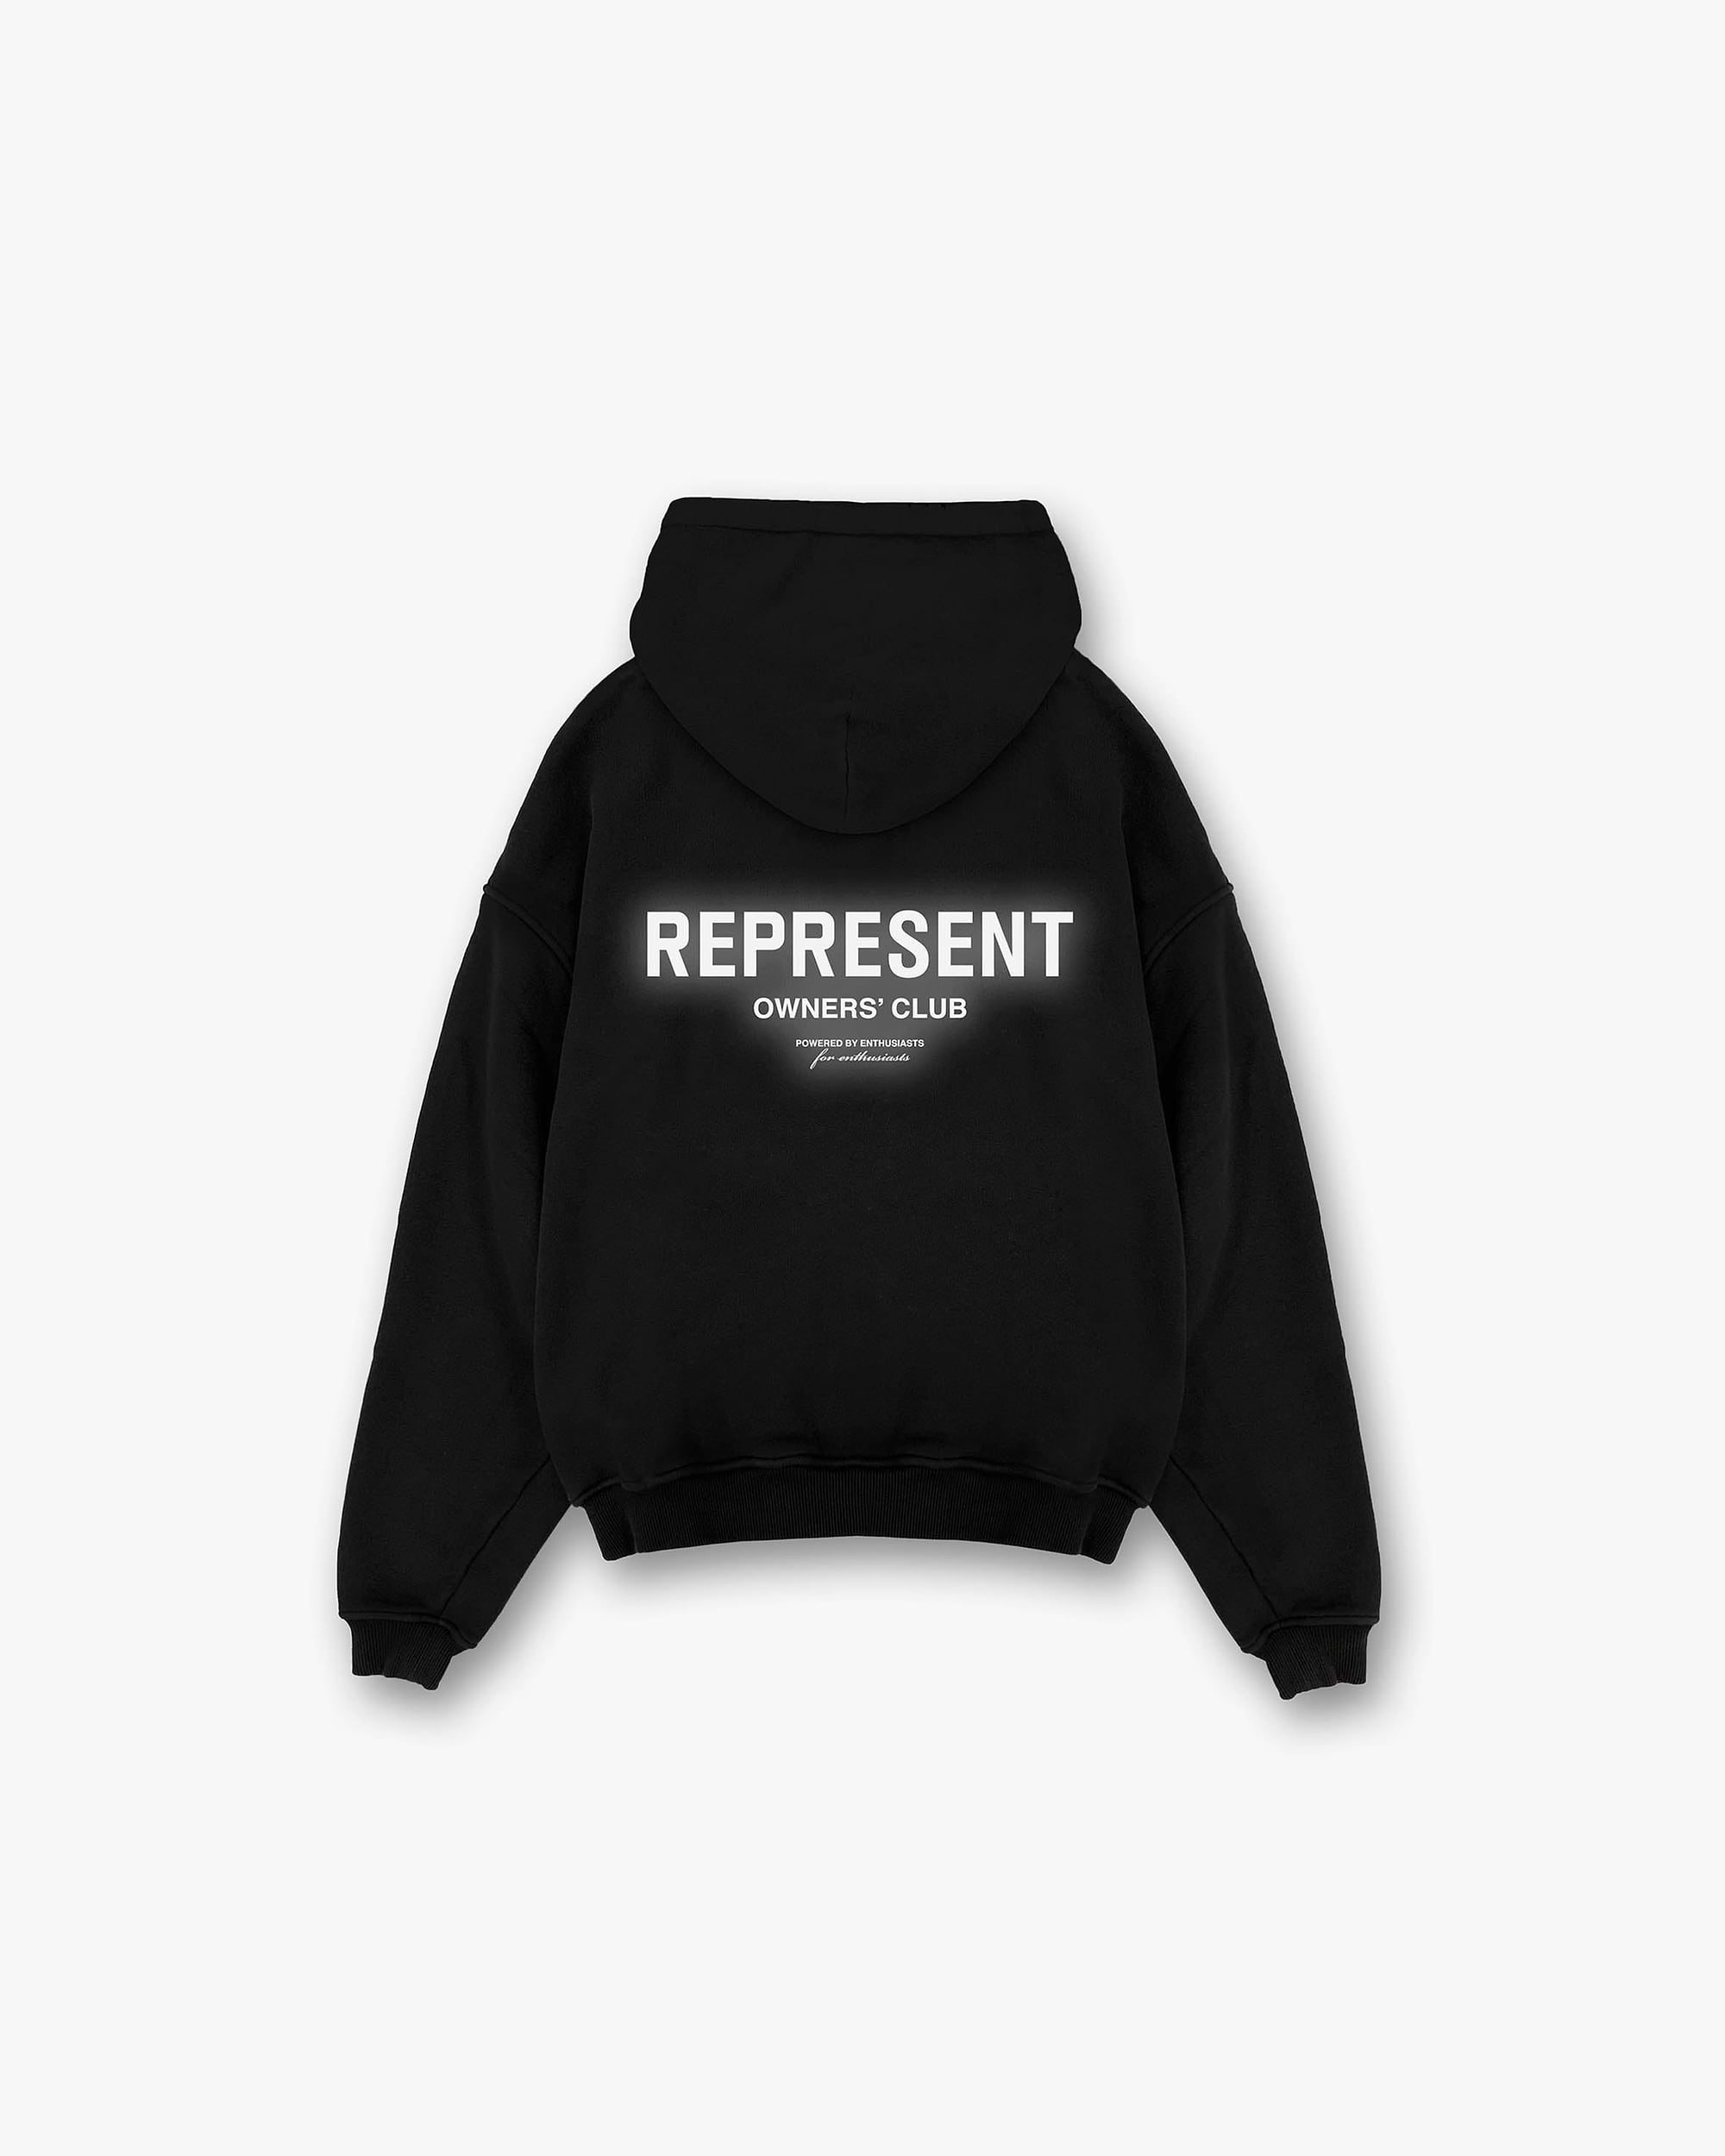 Represent Owners Club Hoodie | Black Reflective Hoodies Owners Club | Represent Clo